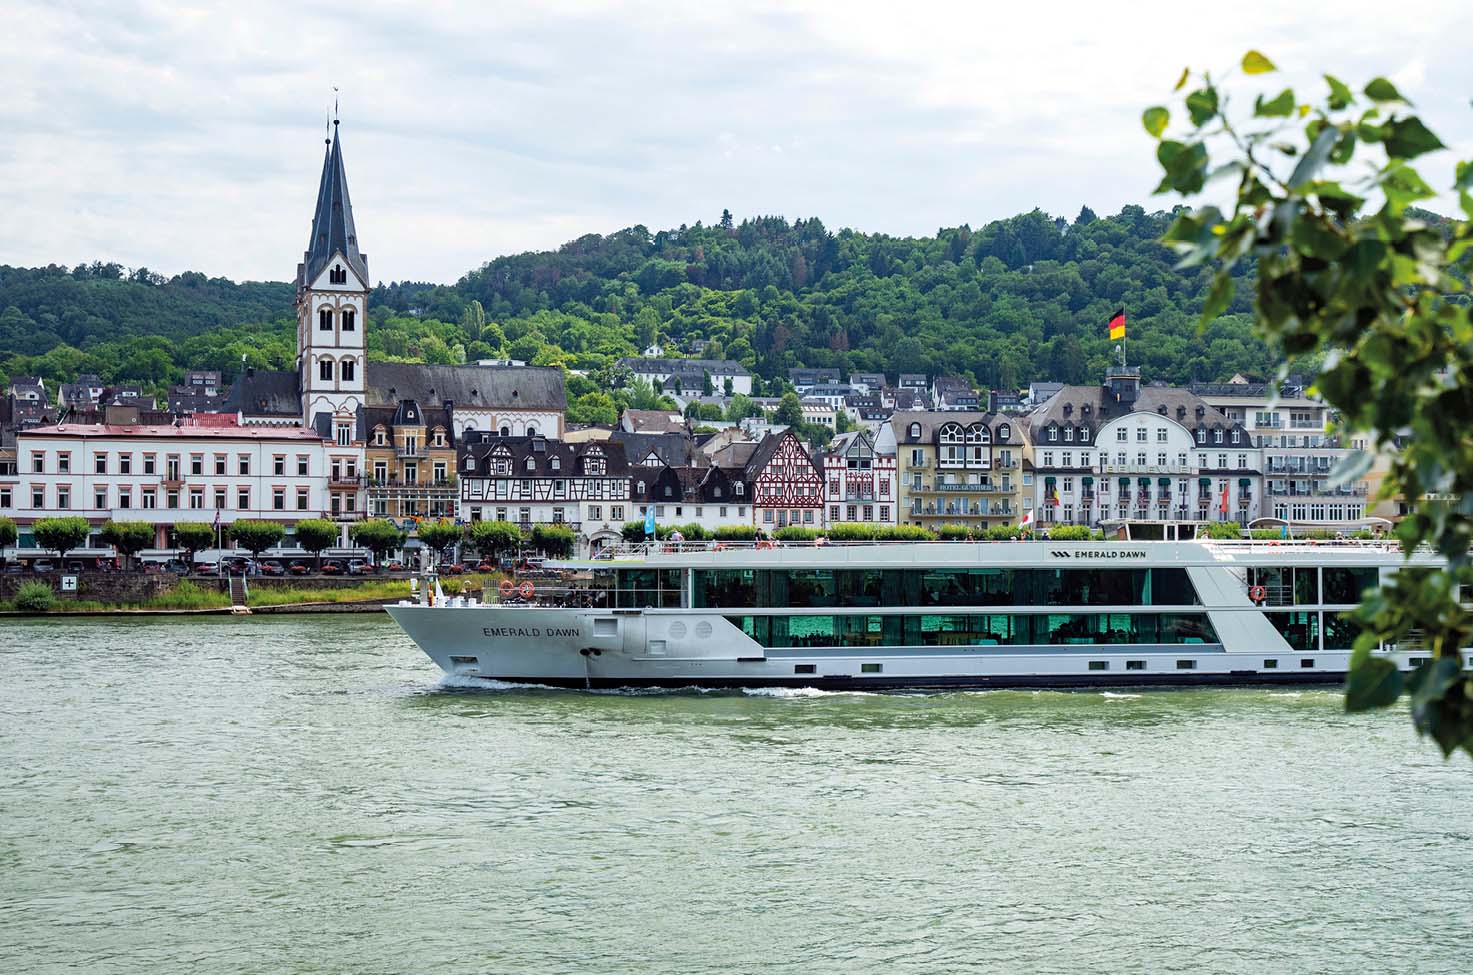 Luxury river cruise ship sailing past a charming town on the Rhine Gorge, along the Rhine river